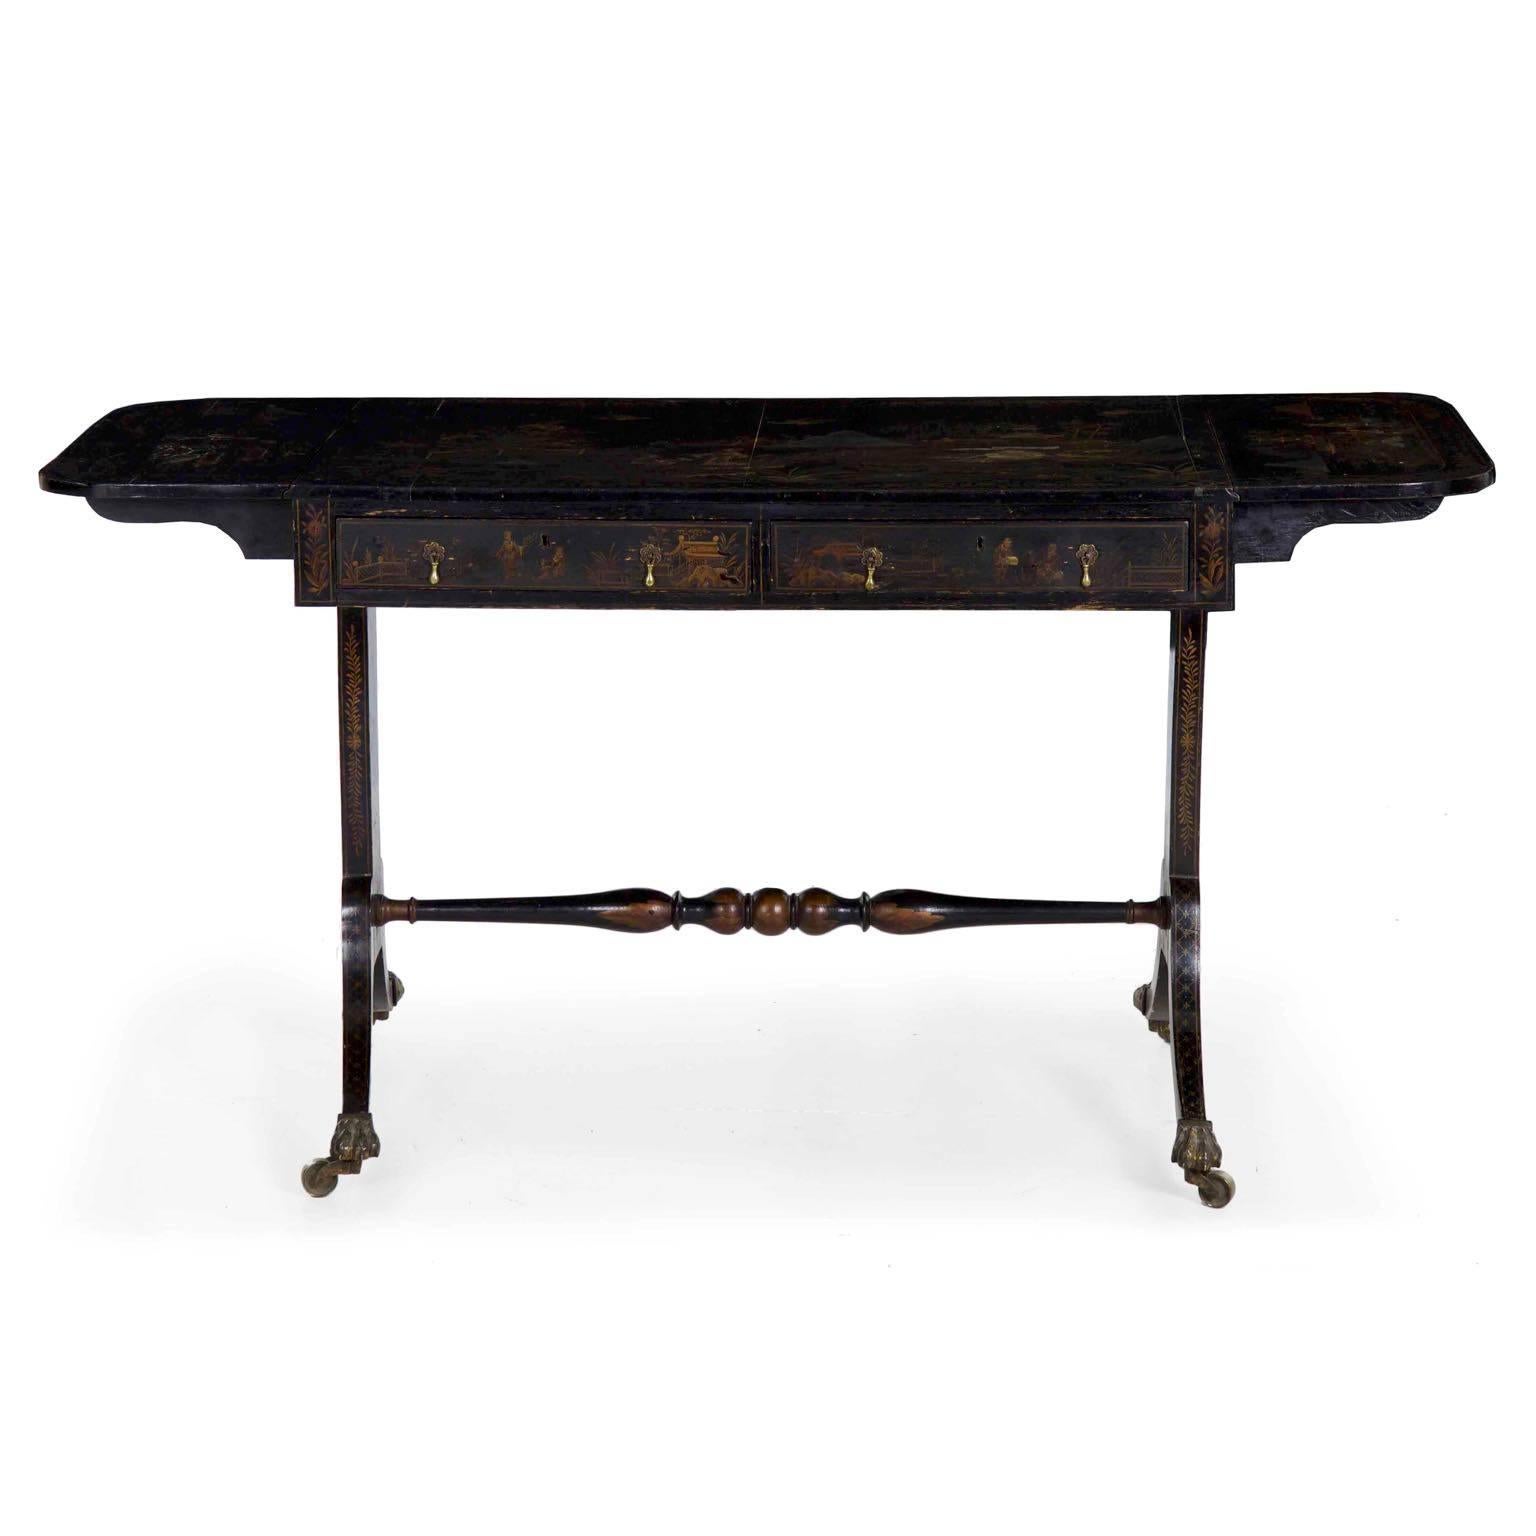 Brass 19th Century English Regency Chinoiserie Decorated Sofa Table